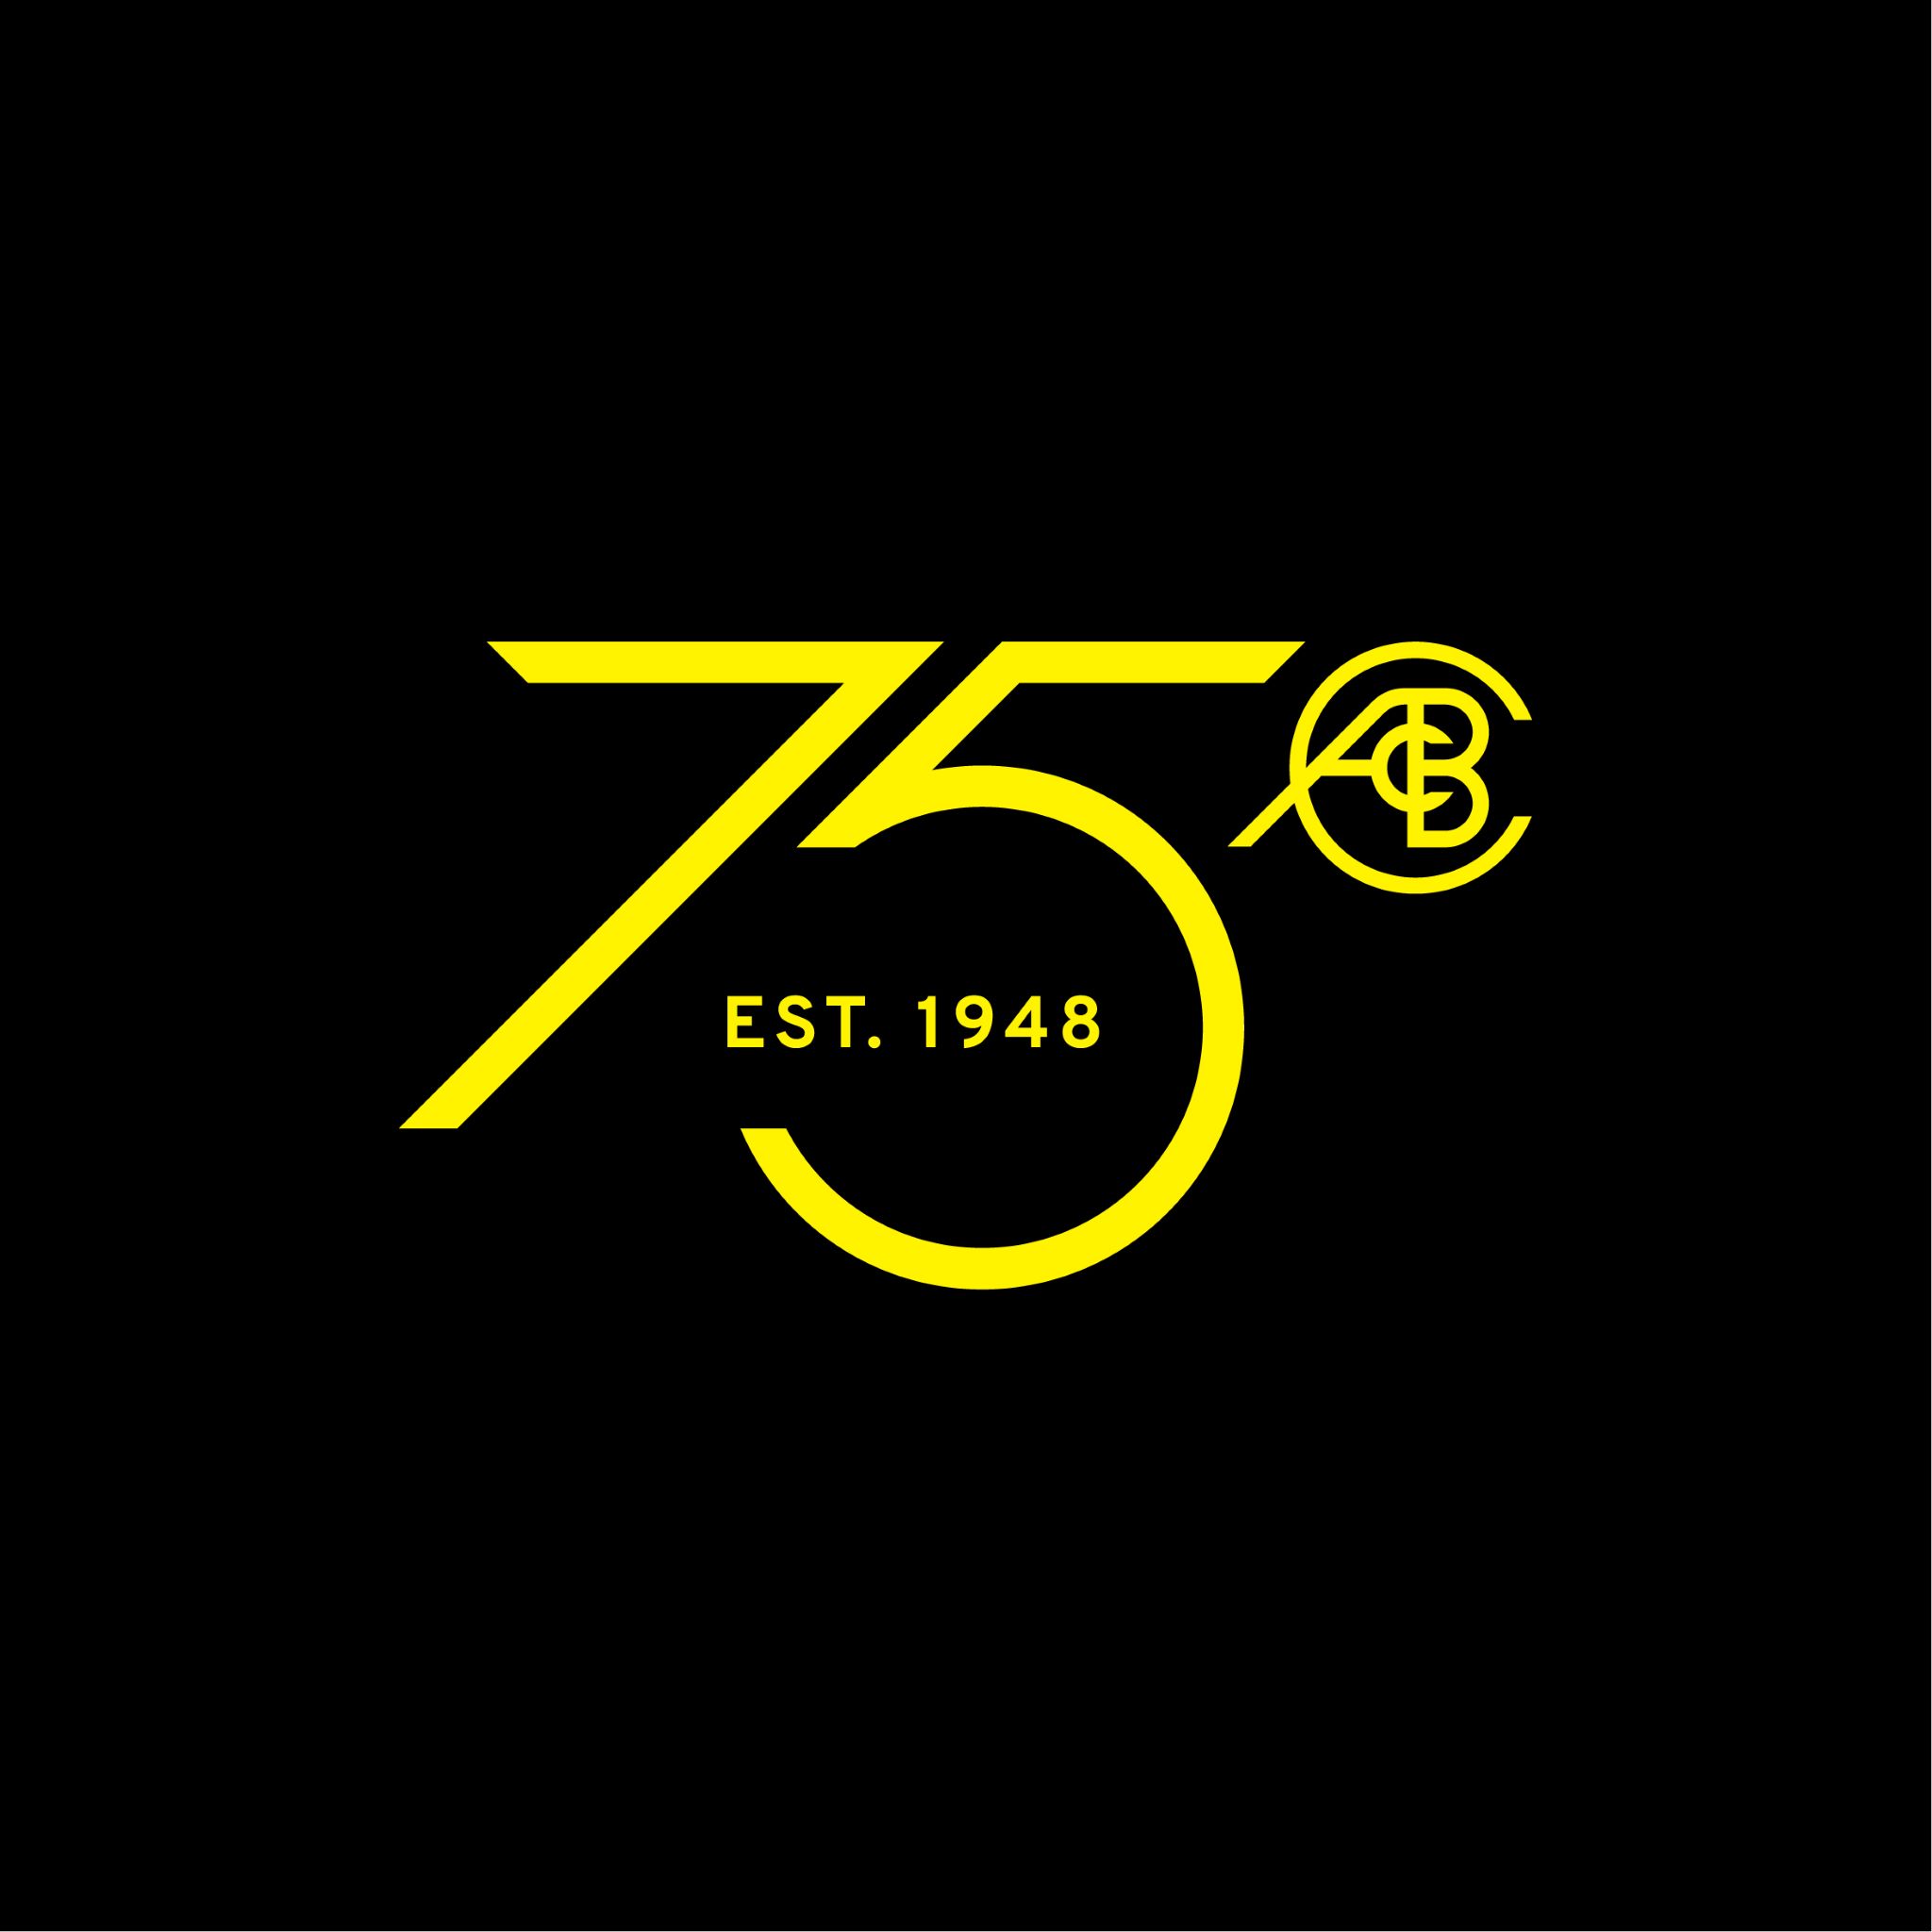 Lotus' 75th Anniversary graphic in yellow on a black background.